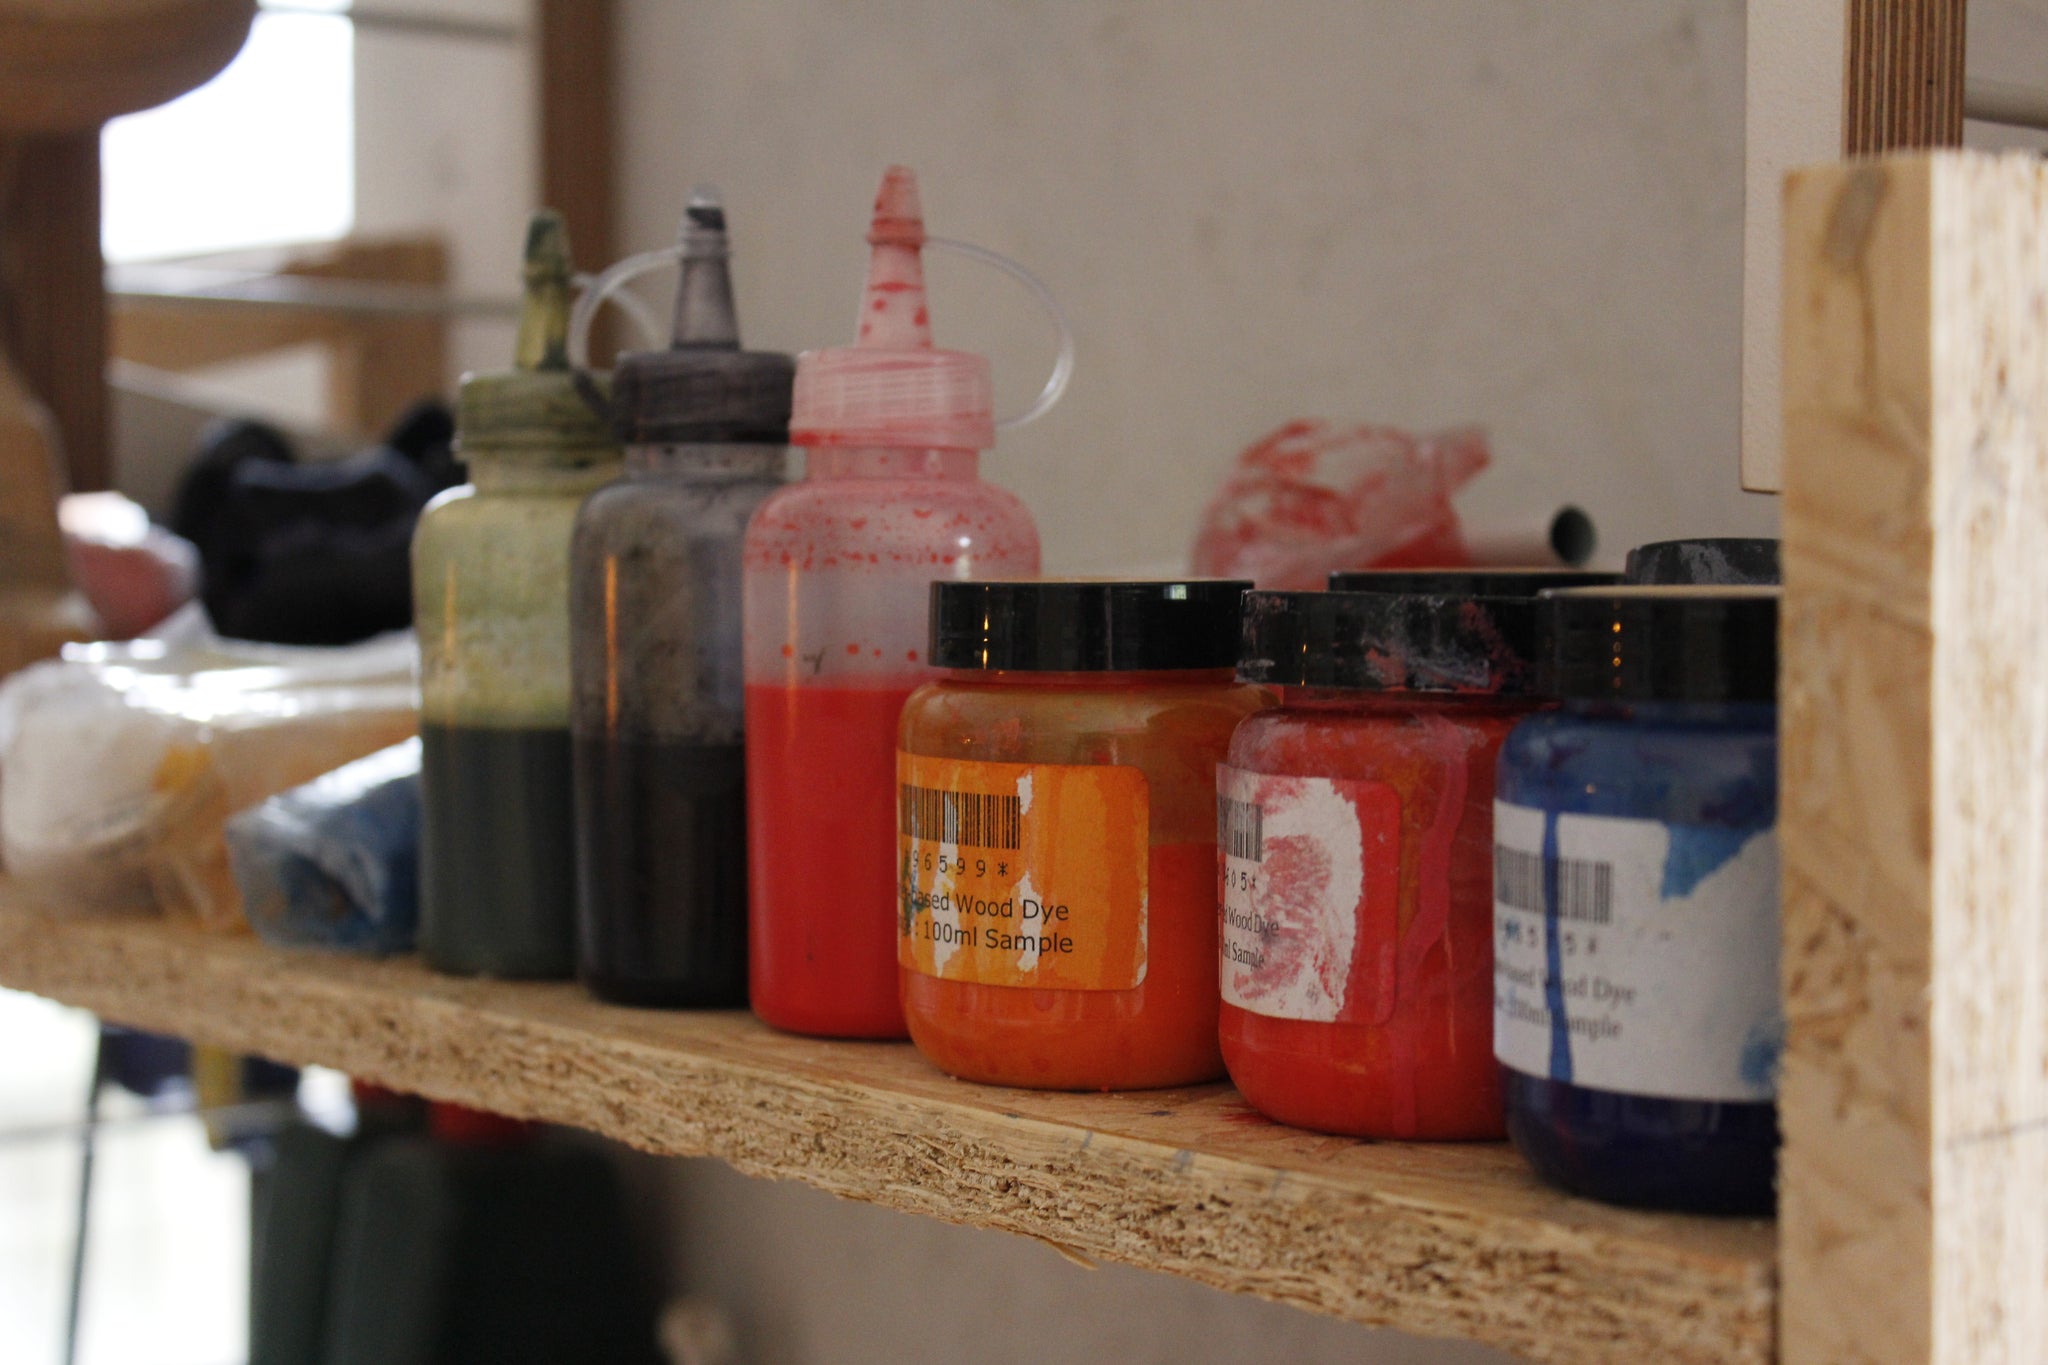 Exciting-looking Inks On Neb's Hand-made Shelves